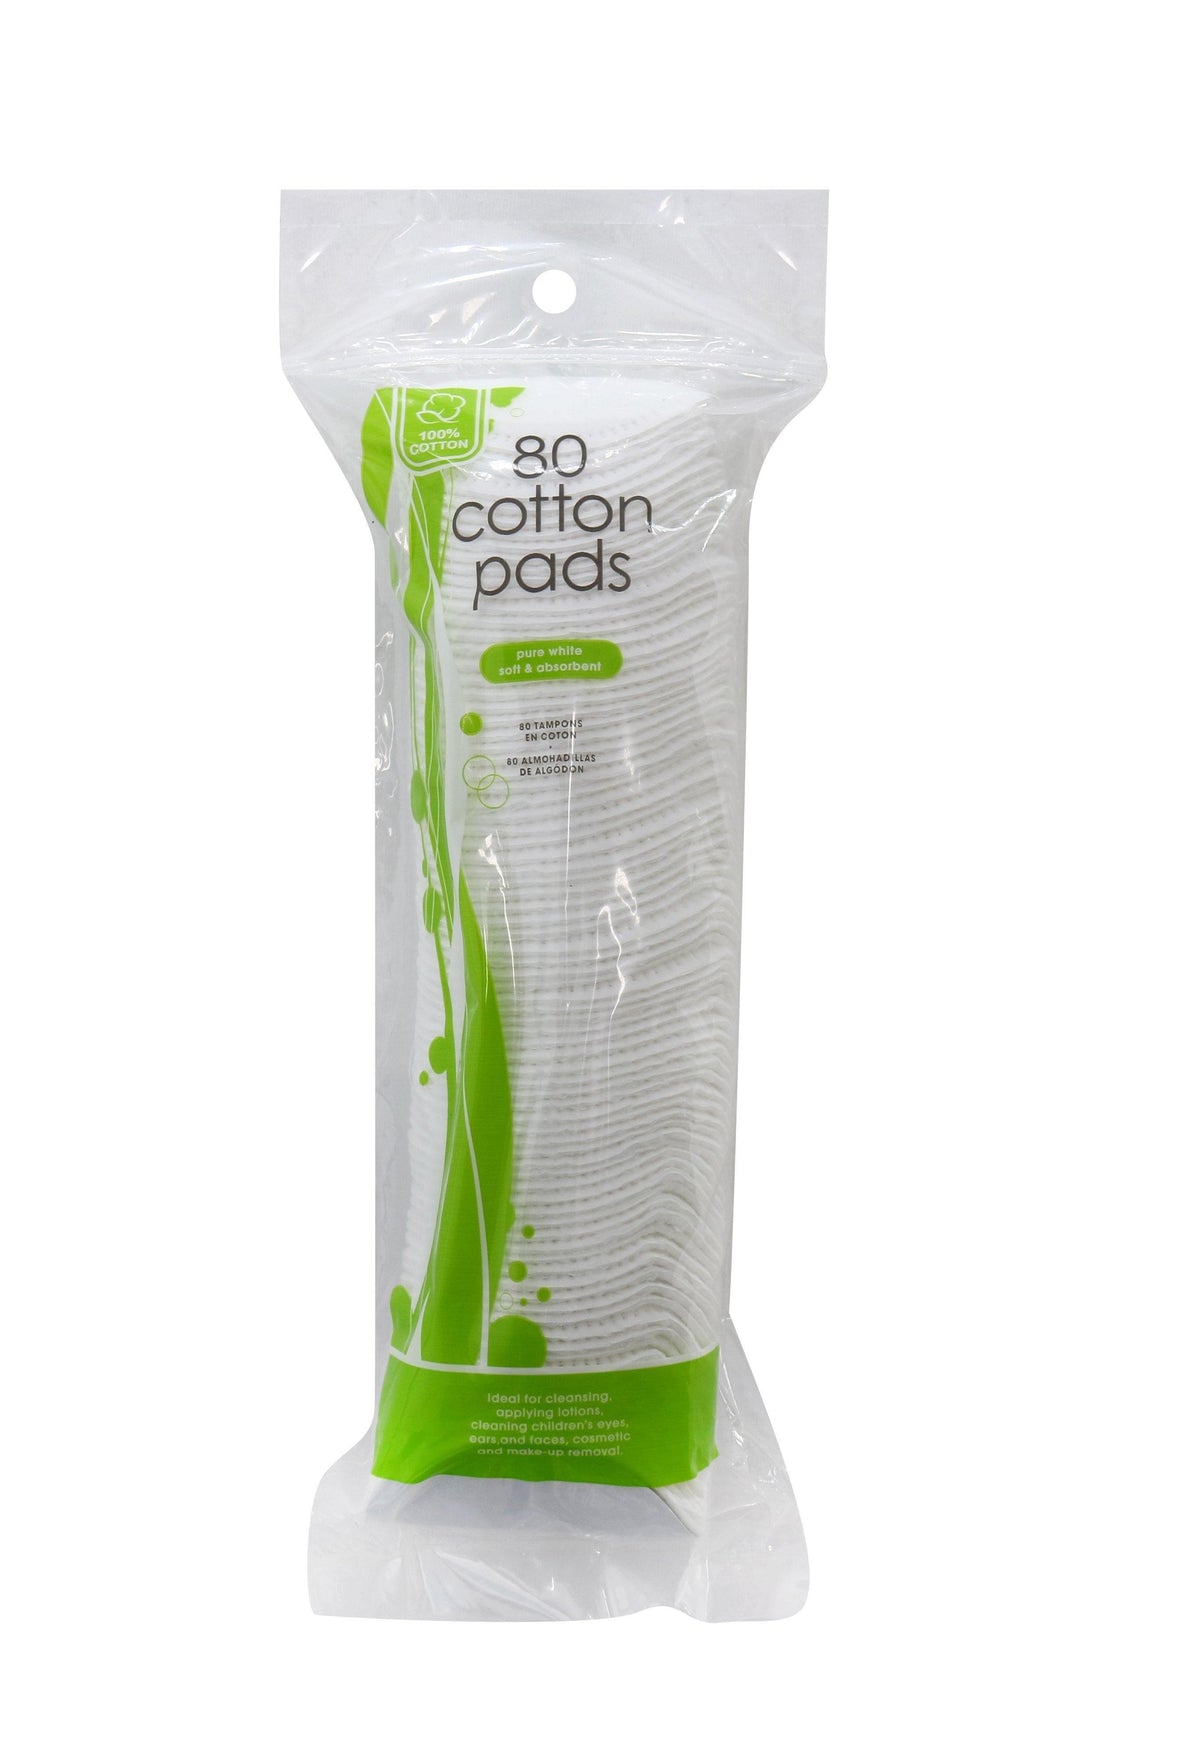 Cotton Facial Pads | 80 Pack - Choice Stores